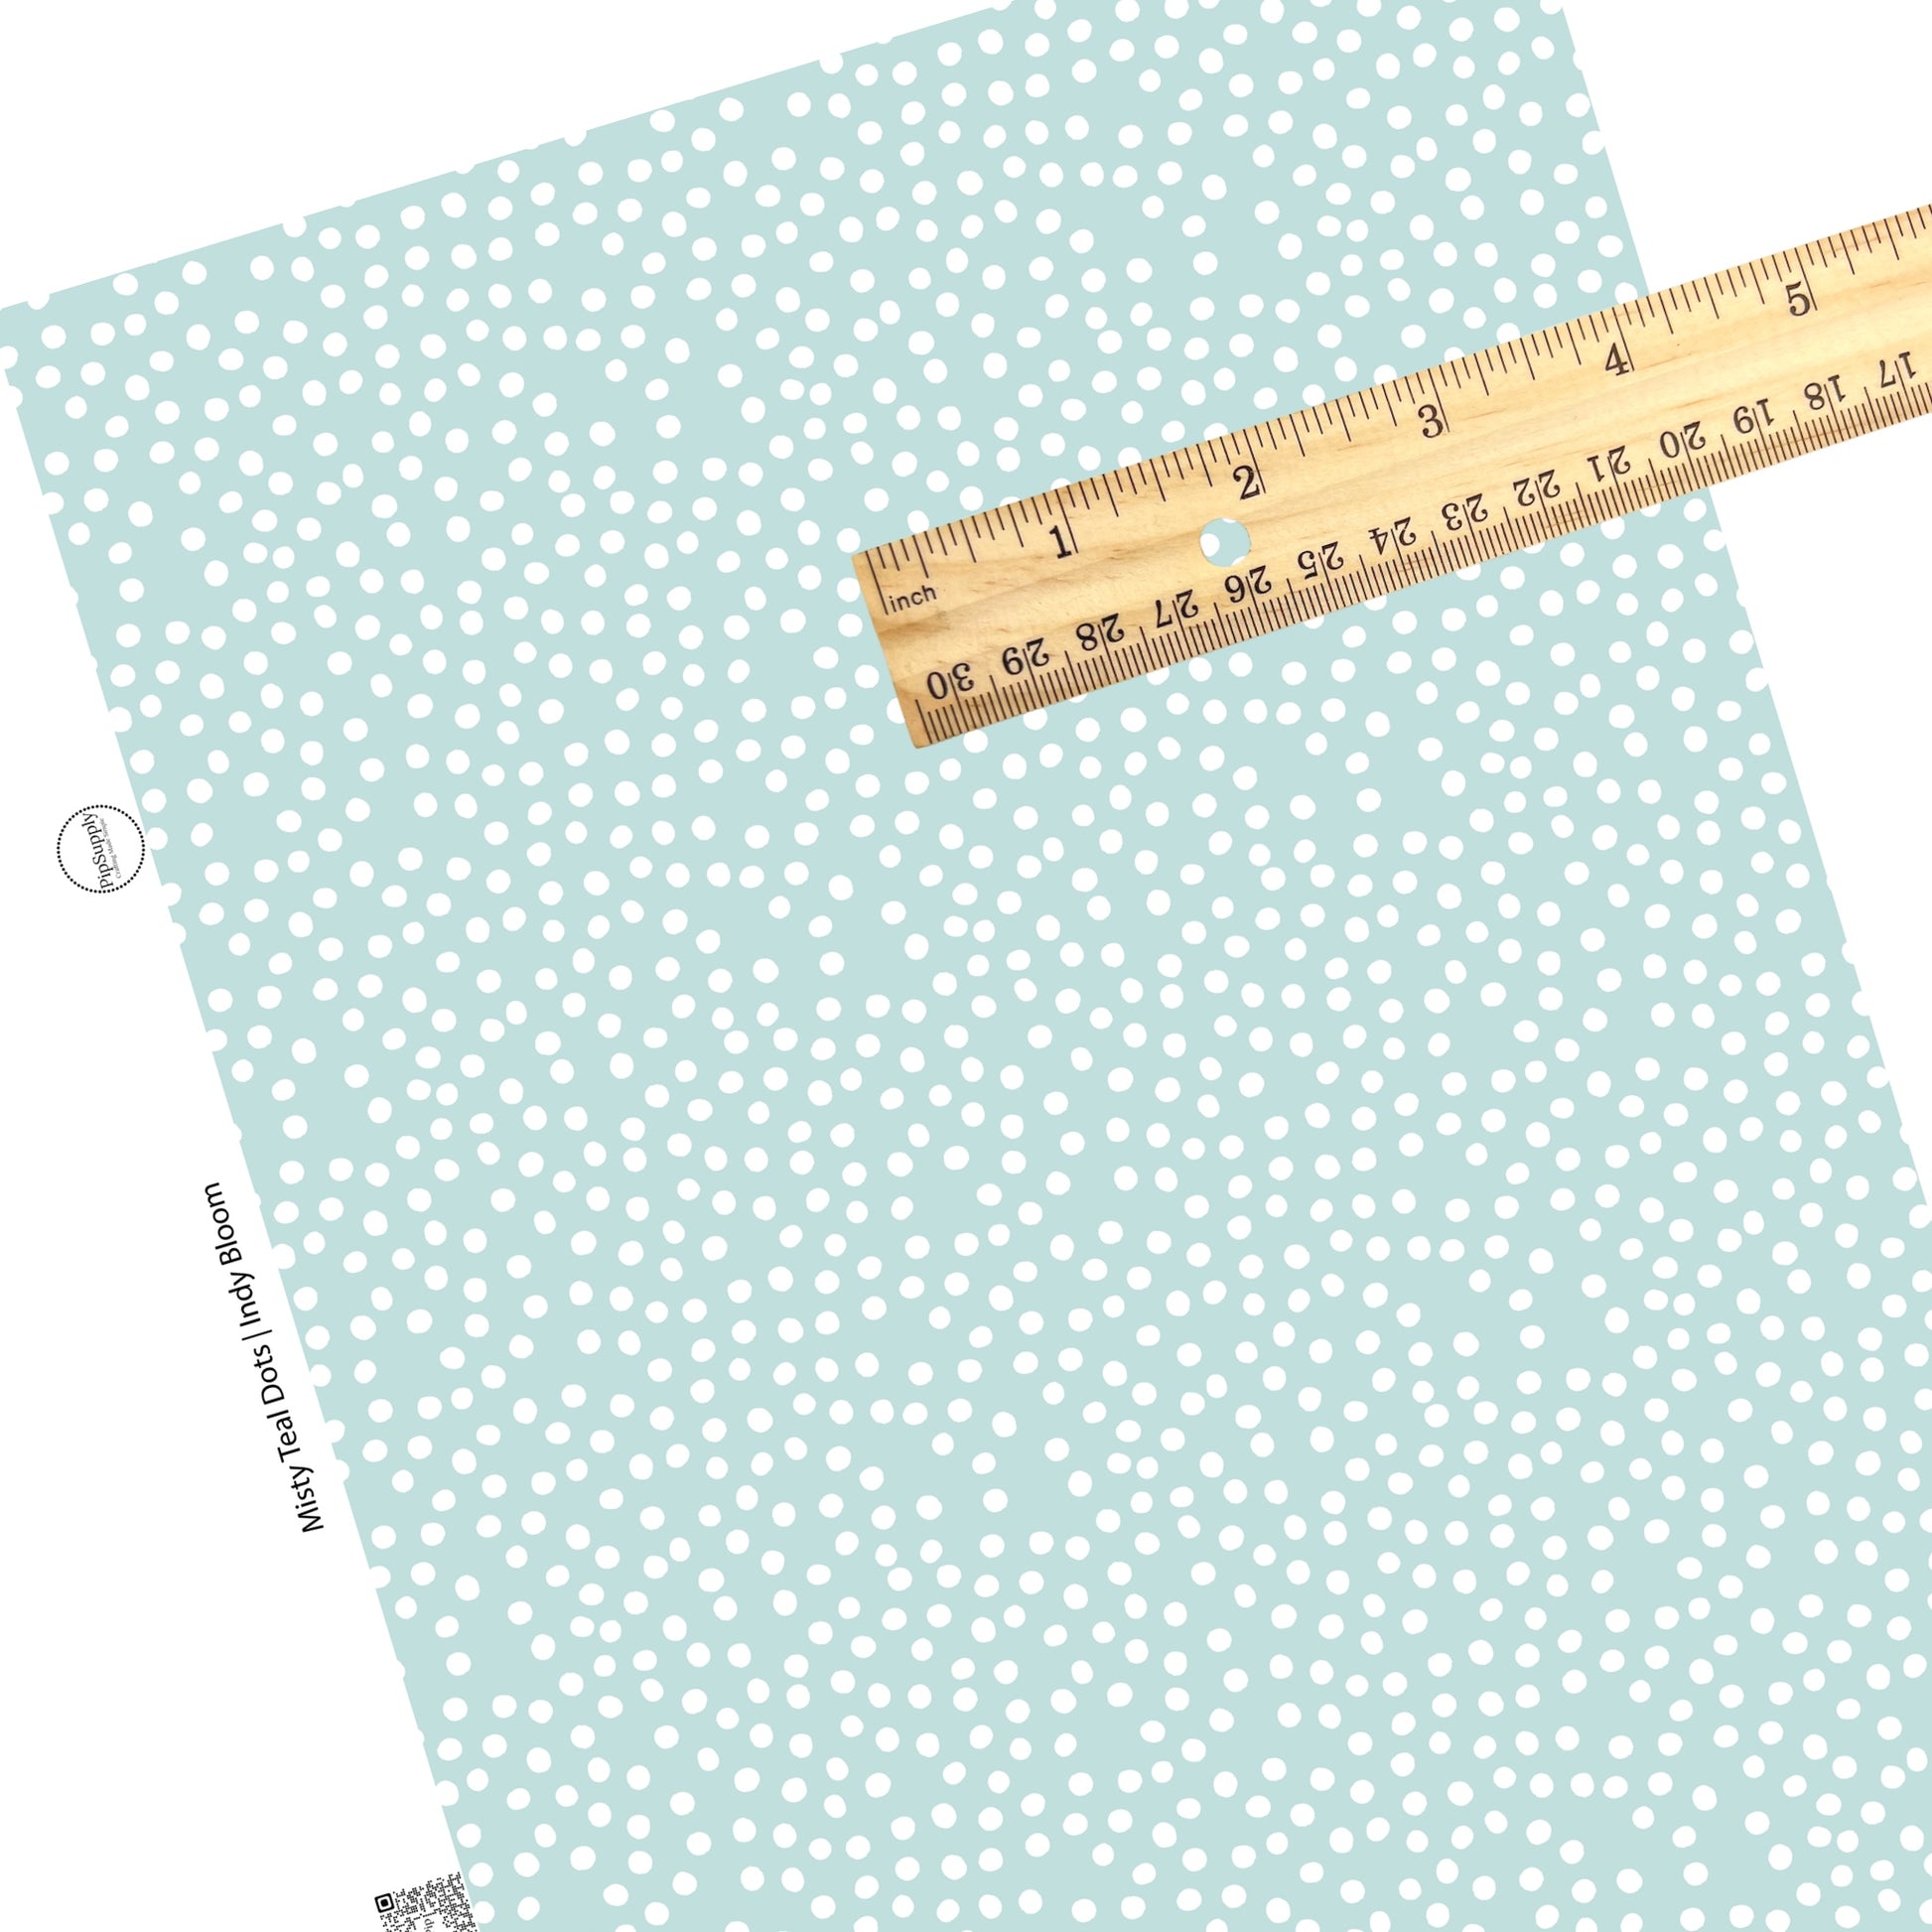 These small dots on a light teal faux leather sheets contain the following design elements: small dots in white scattered on a teal blue background. 